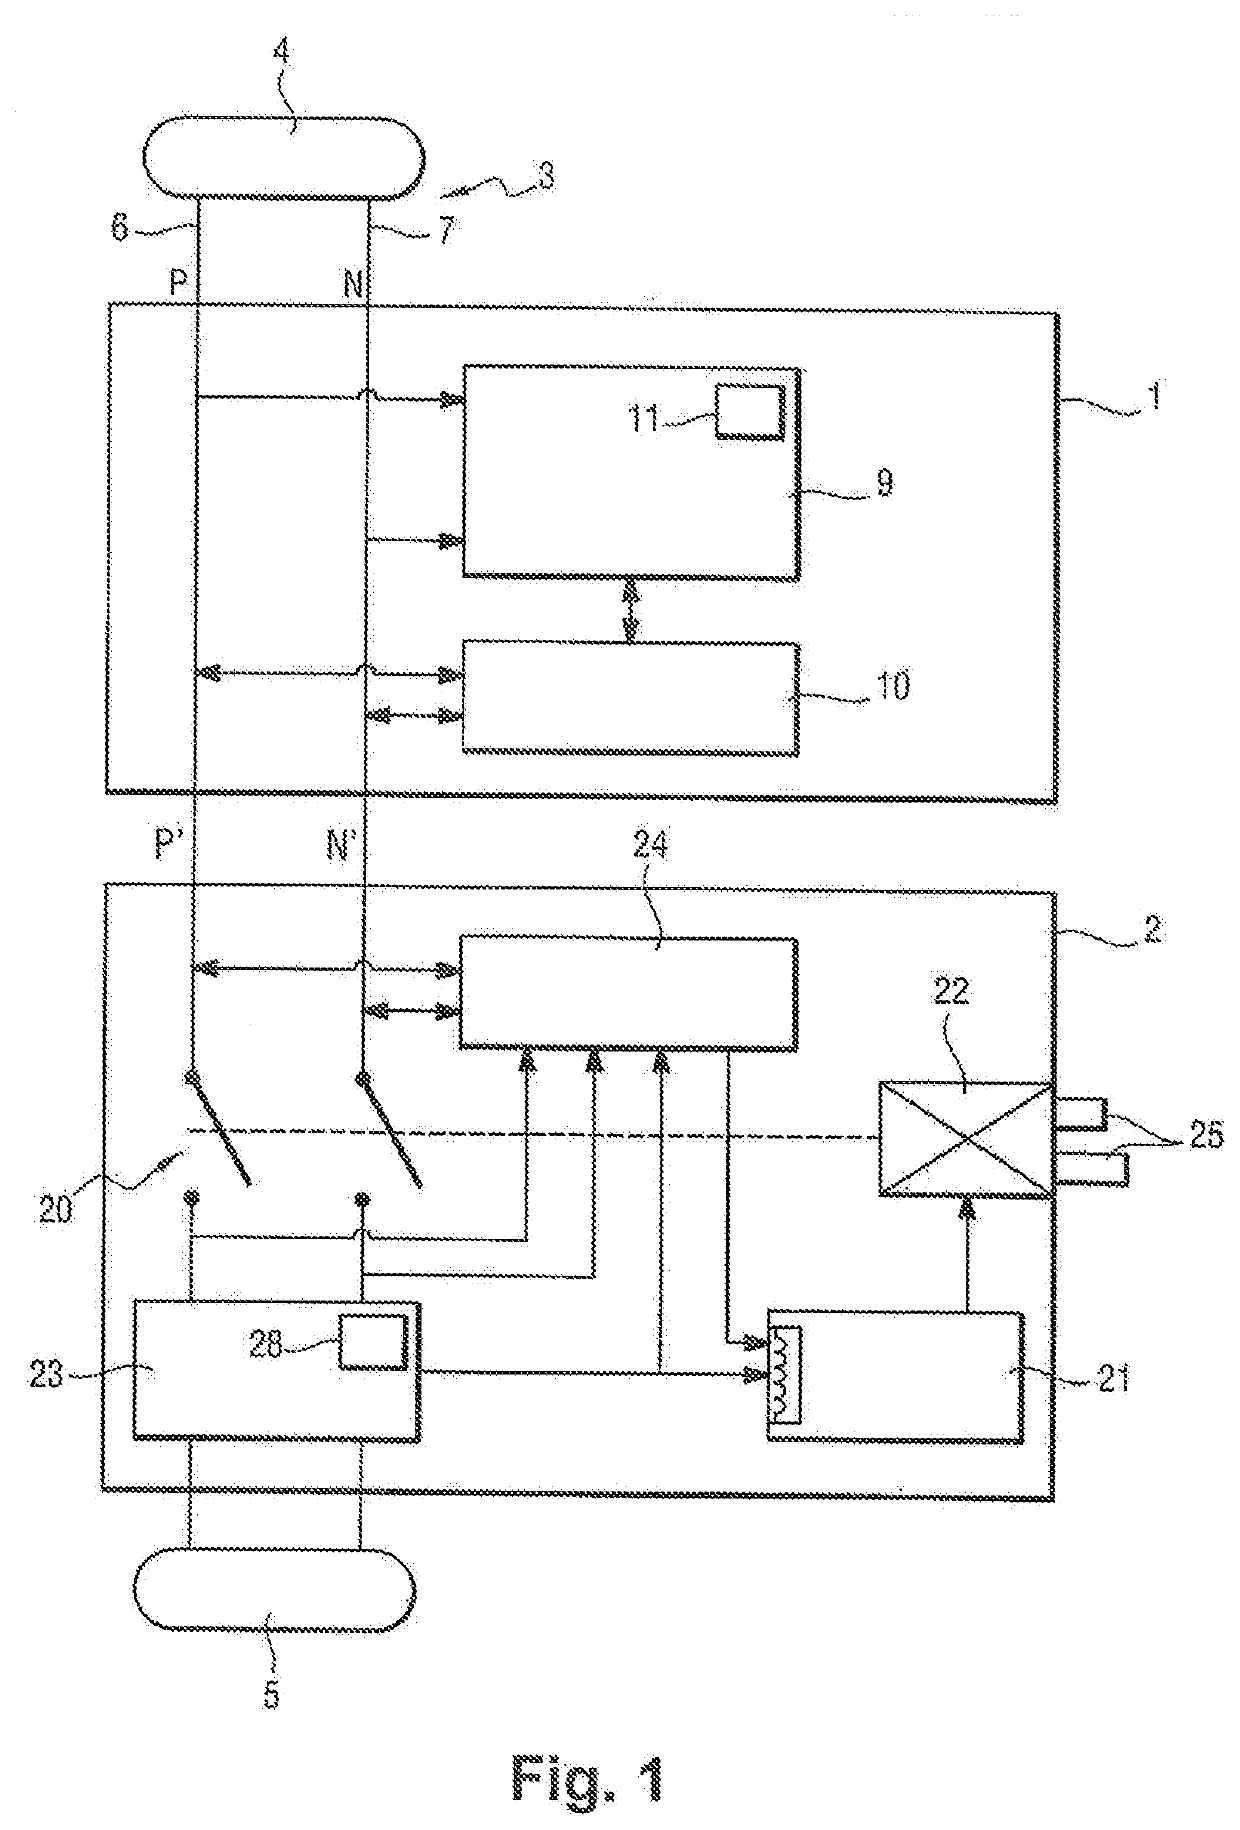 System comprising an electricity meter and a circuit breaker